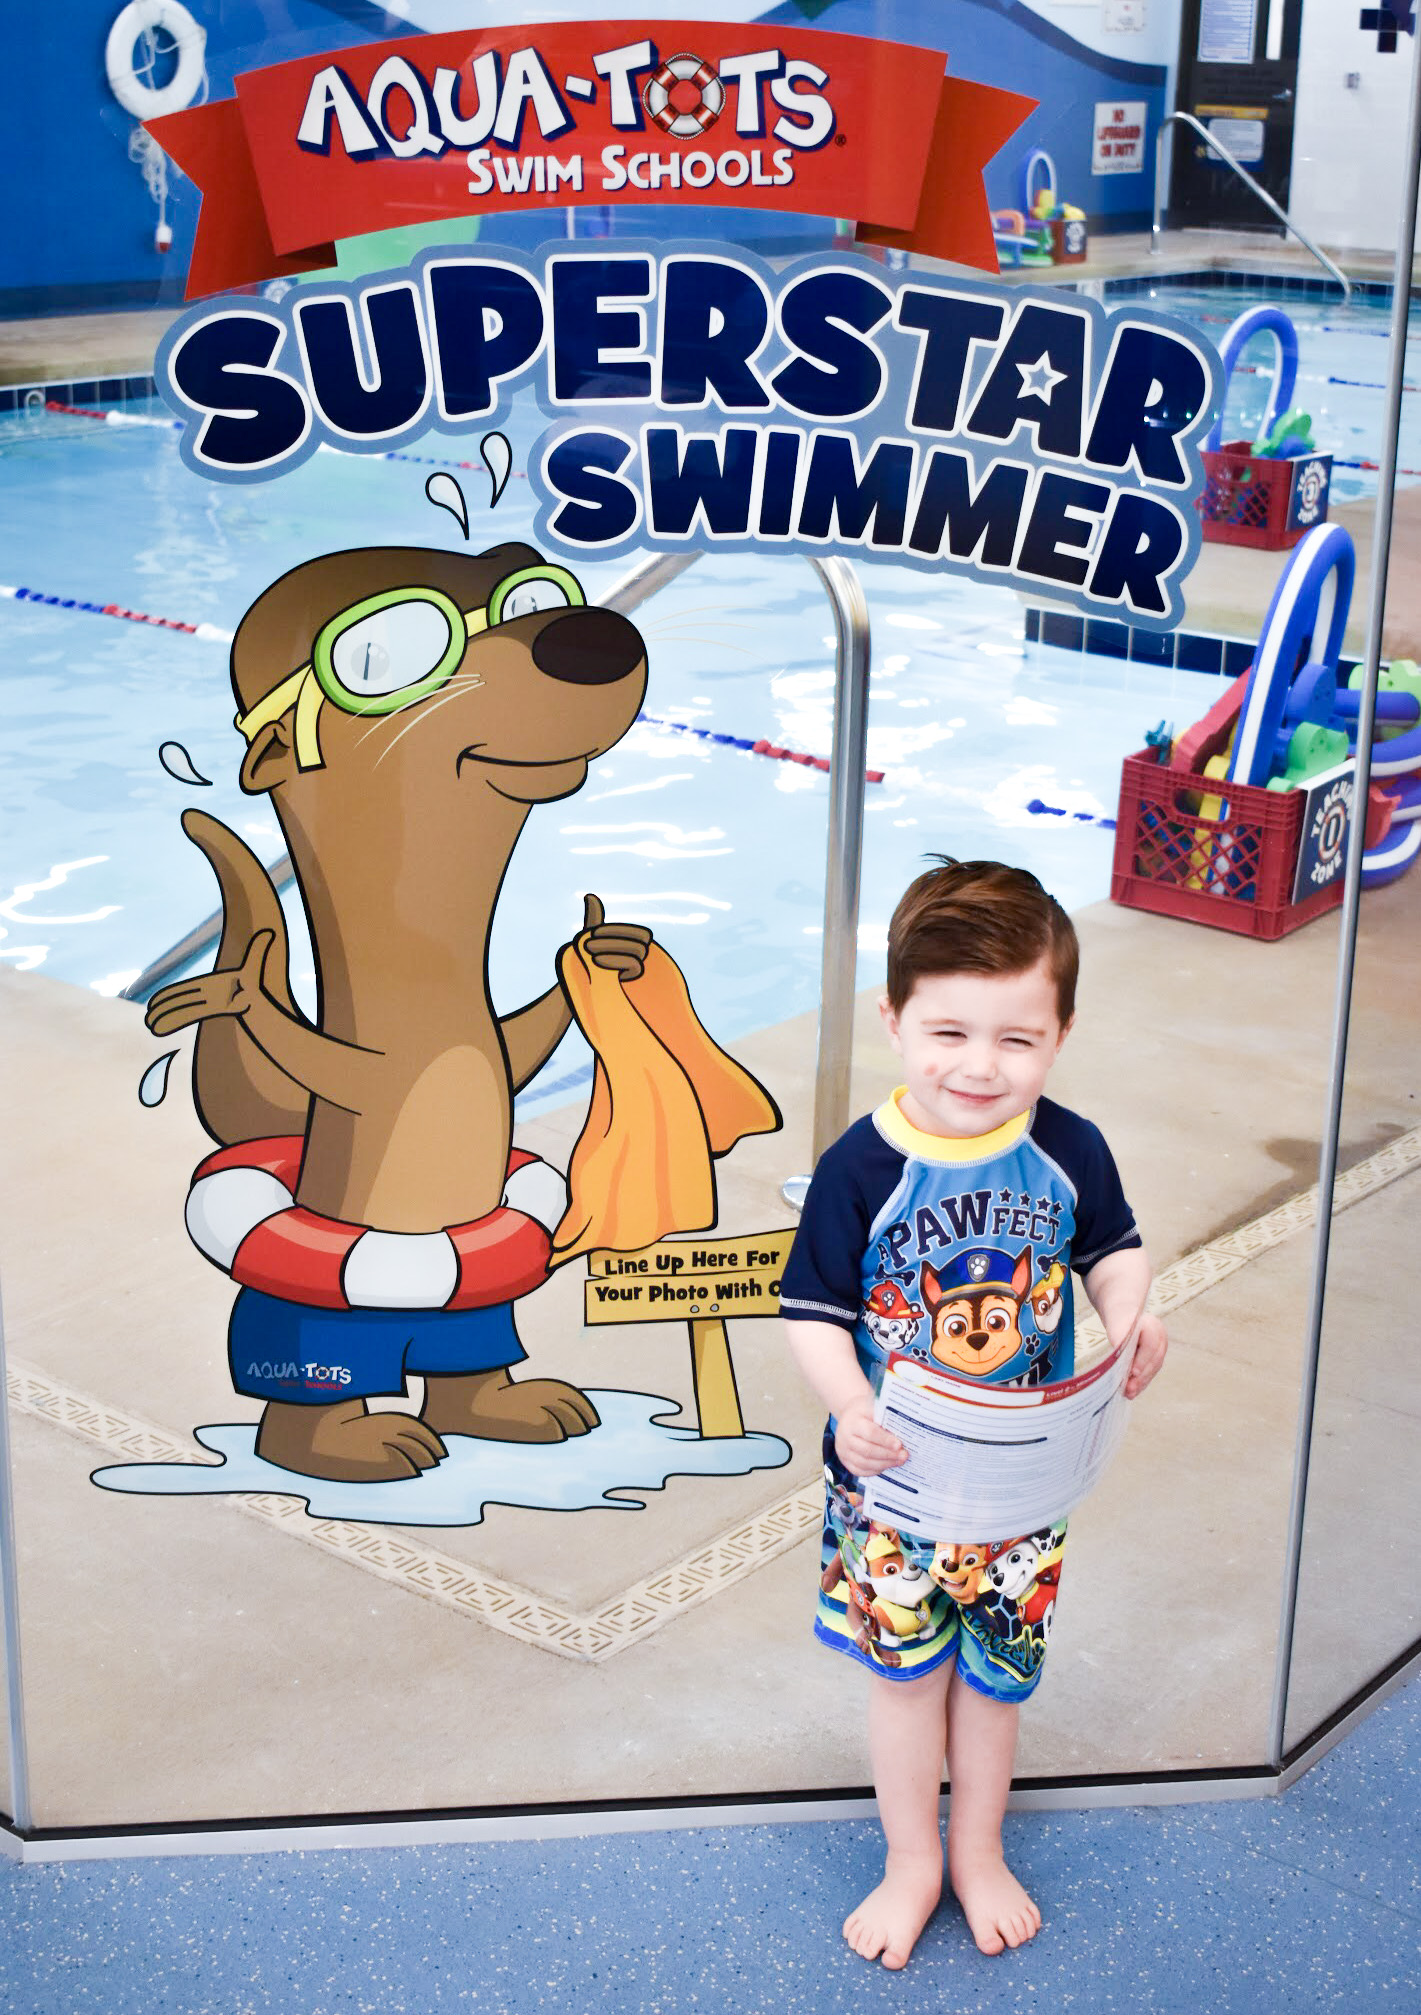 What to Expect at Baby Swim Lessons: Prepare yourself and your child for their first swim lesson with these tips! My infant and preschooler take lessons at Aqua-Tots Swim School in Olathe, KS. Here's what I learned from the pros about baby swim lessons and getting kids acclimated to the water!